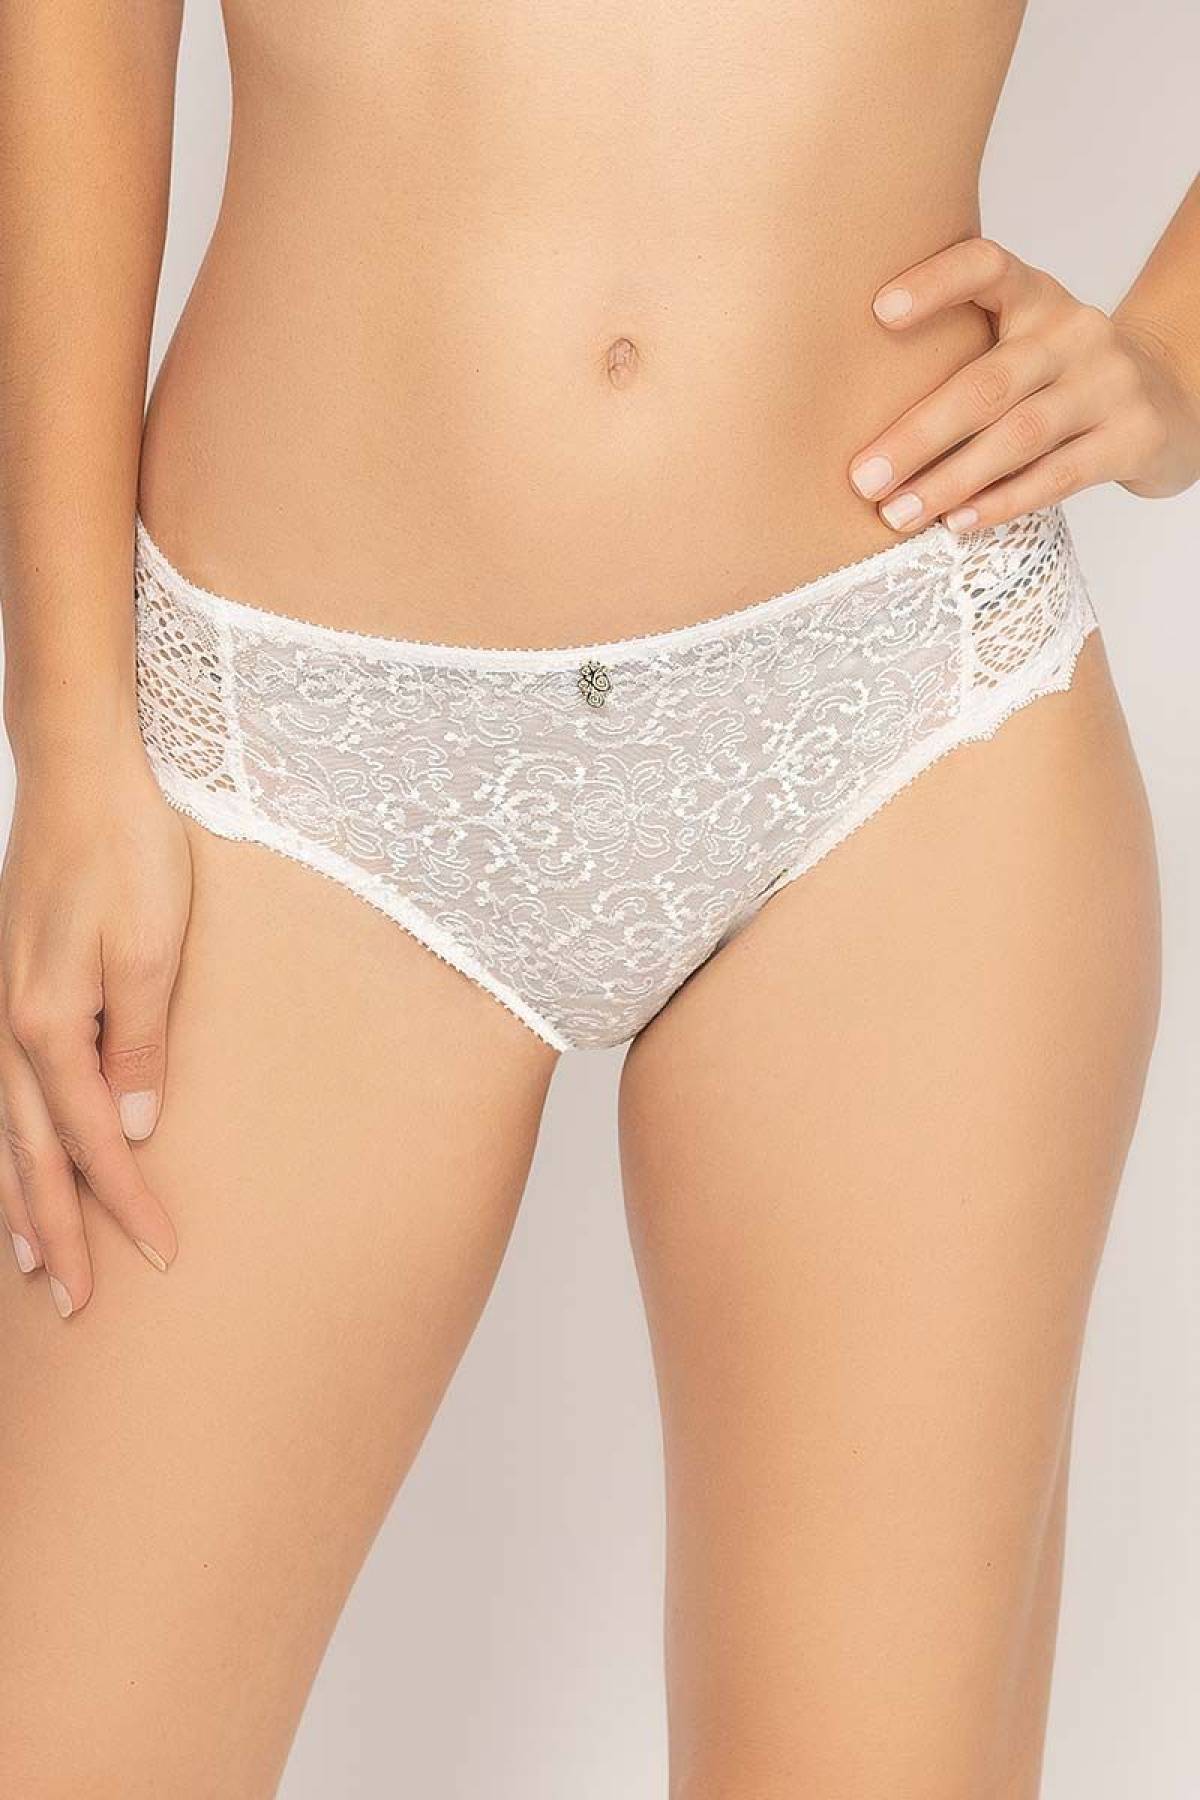 Sheer plain white lace thong, CASSIOPEE